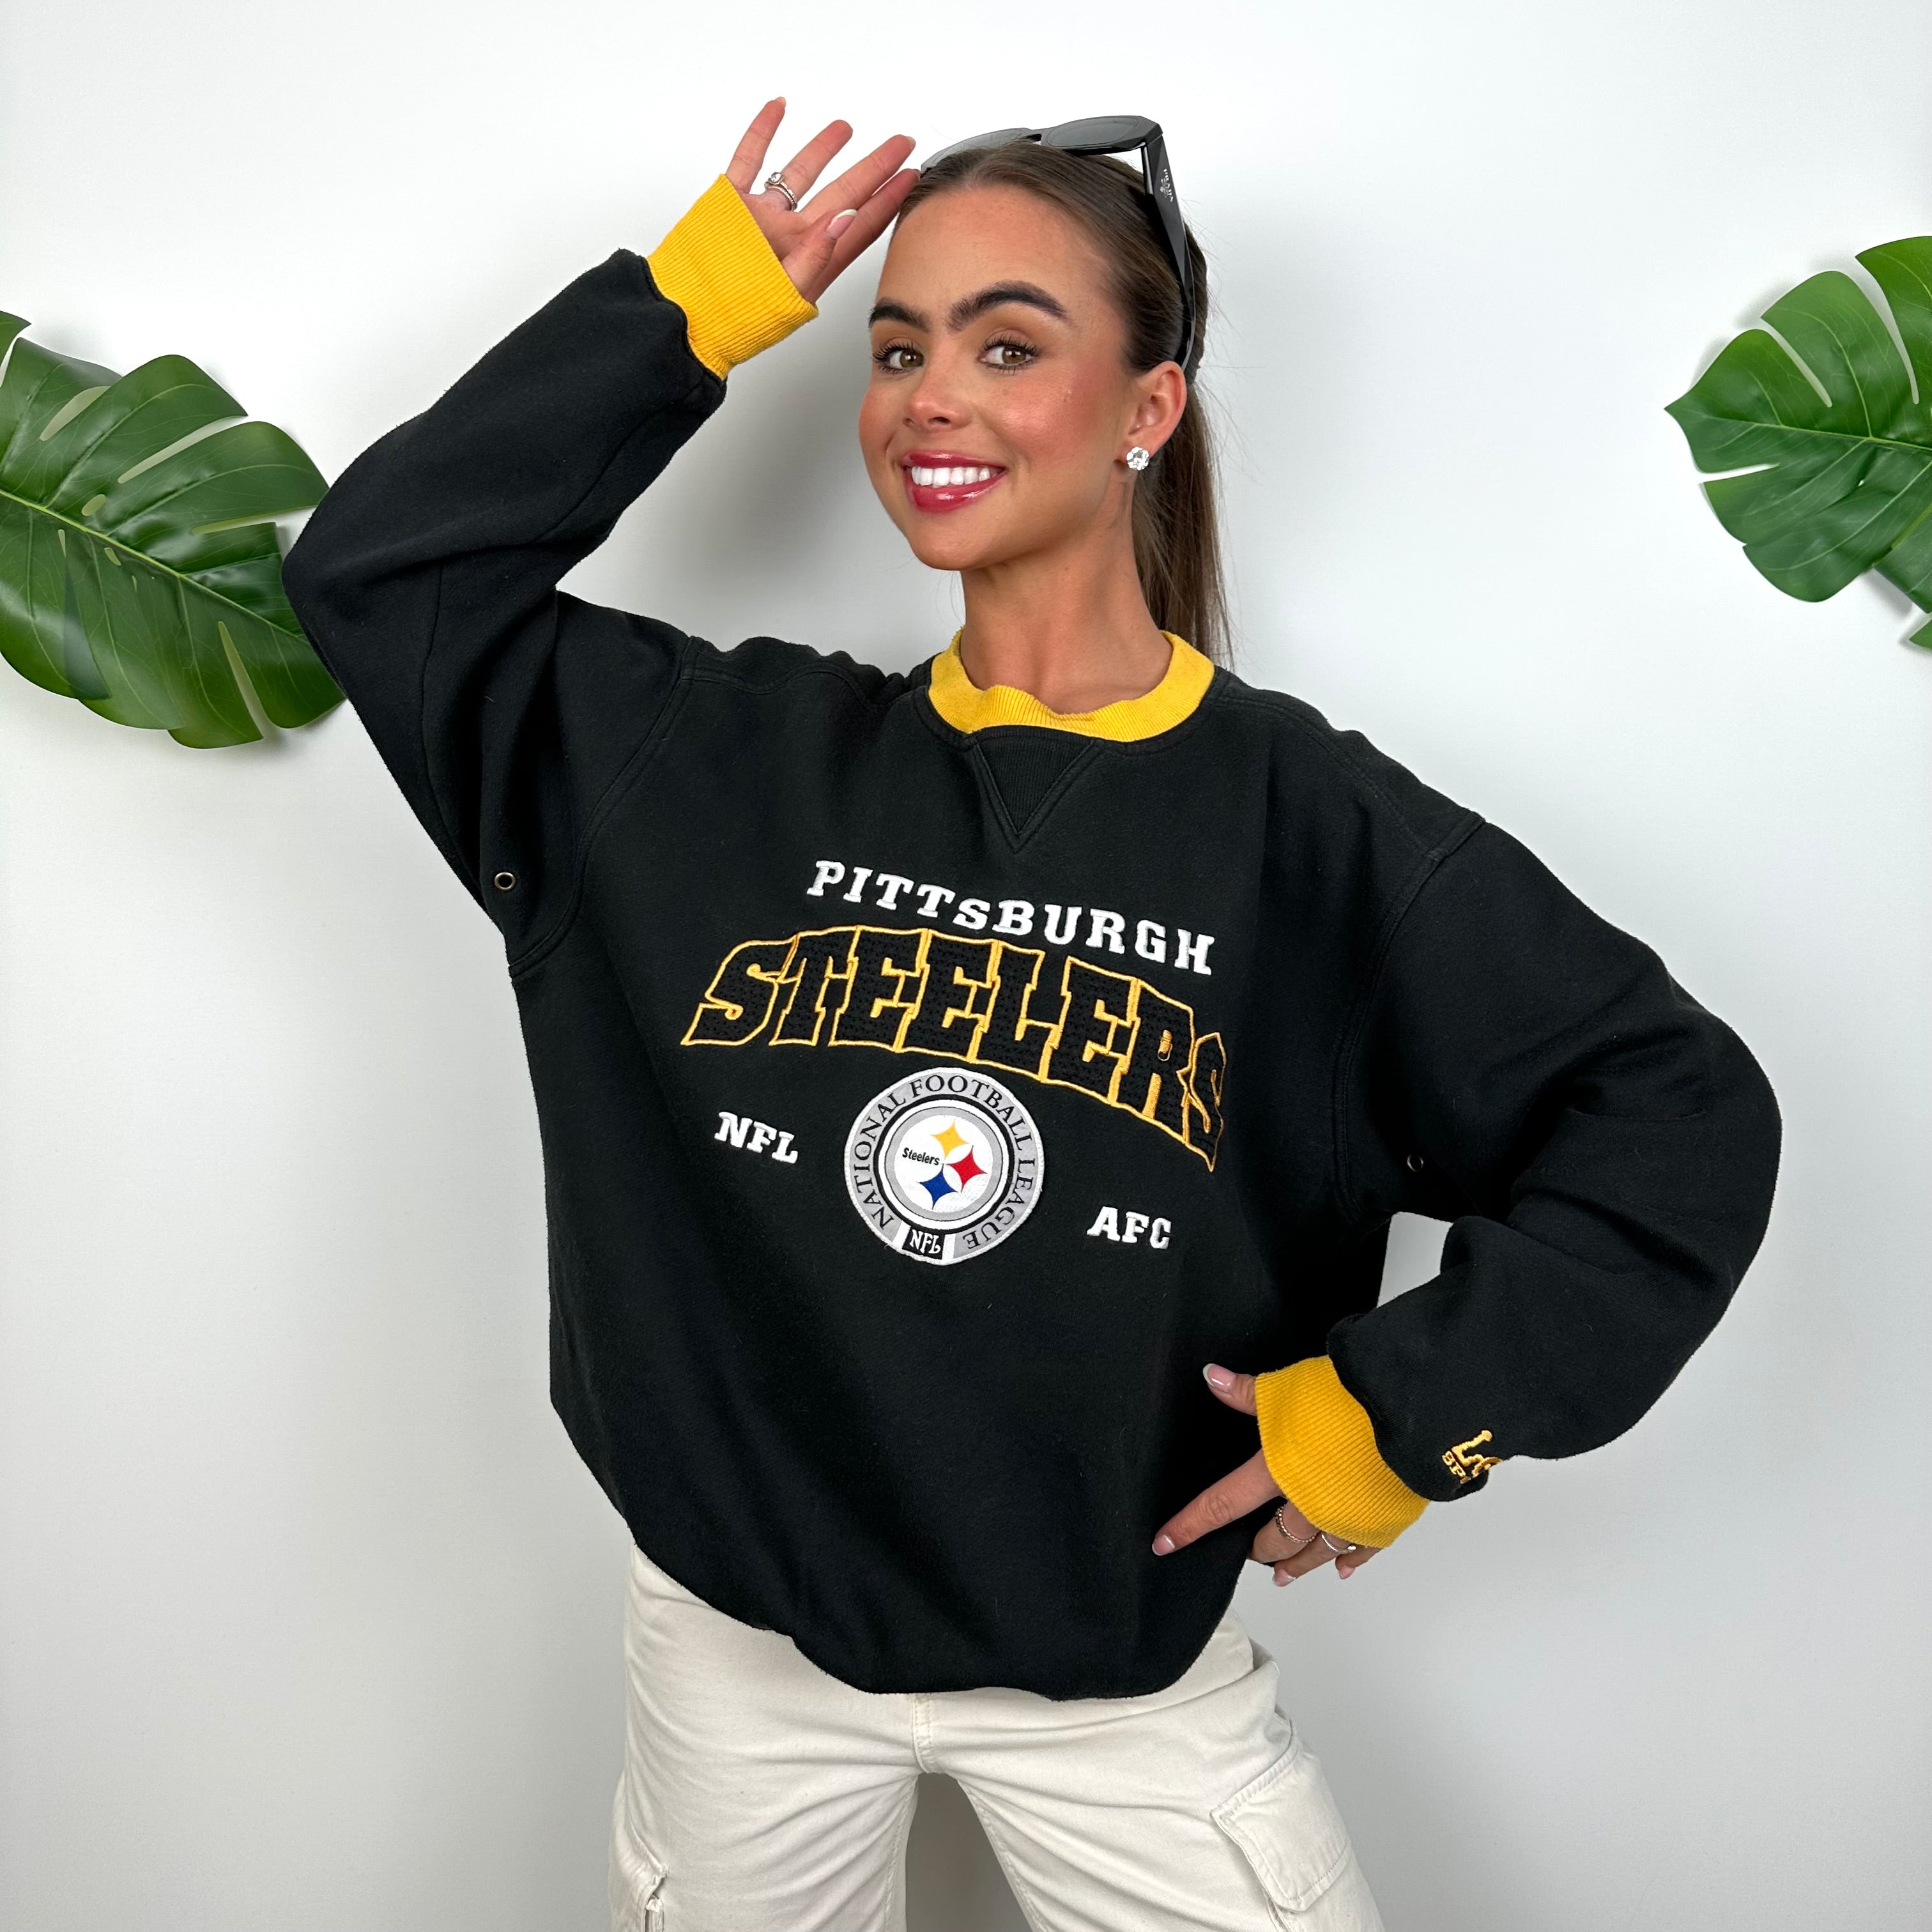 NFL Pittsburgh Steelers Black Embroidered Spell Out Sweatshirt (M)